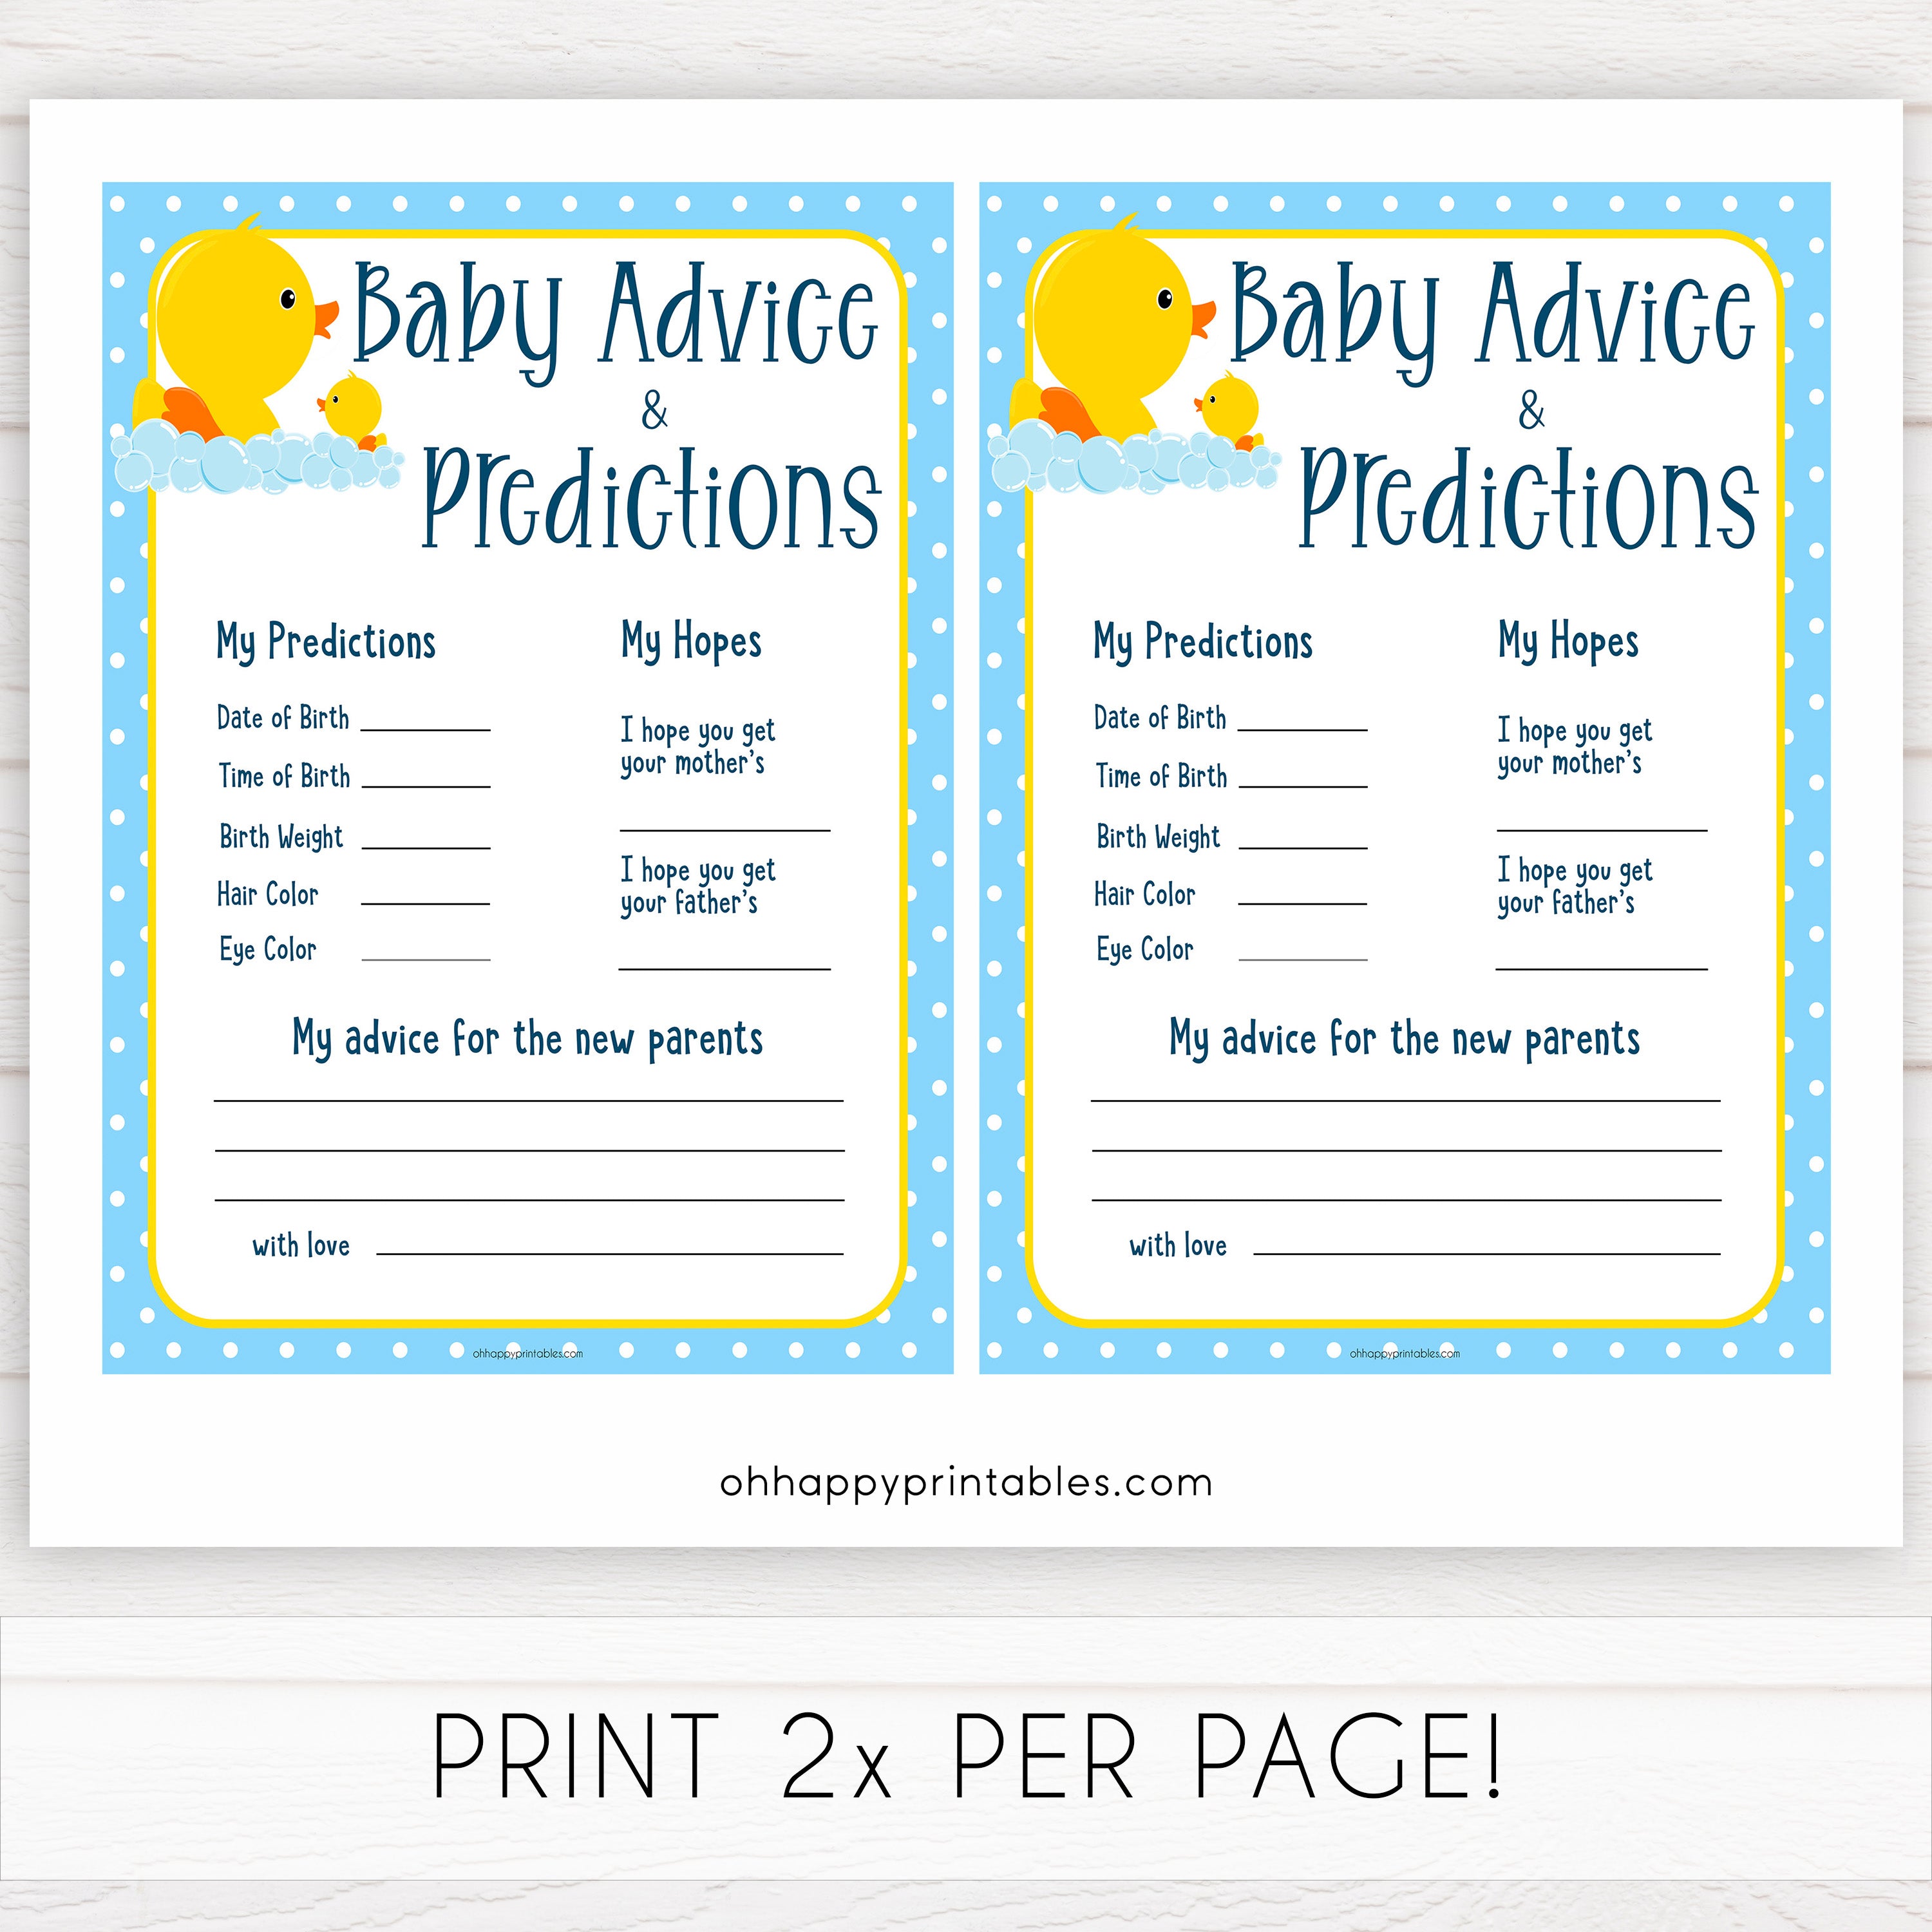 rubber ducky baby games, baby advice and predictions baby game, printable baby games, baby shower games, rubber ducky baby theme, fun baby games, popular baby games